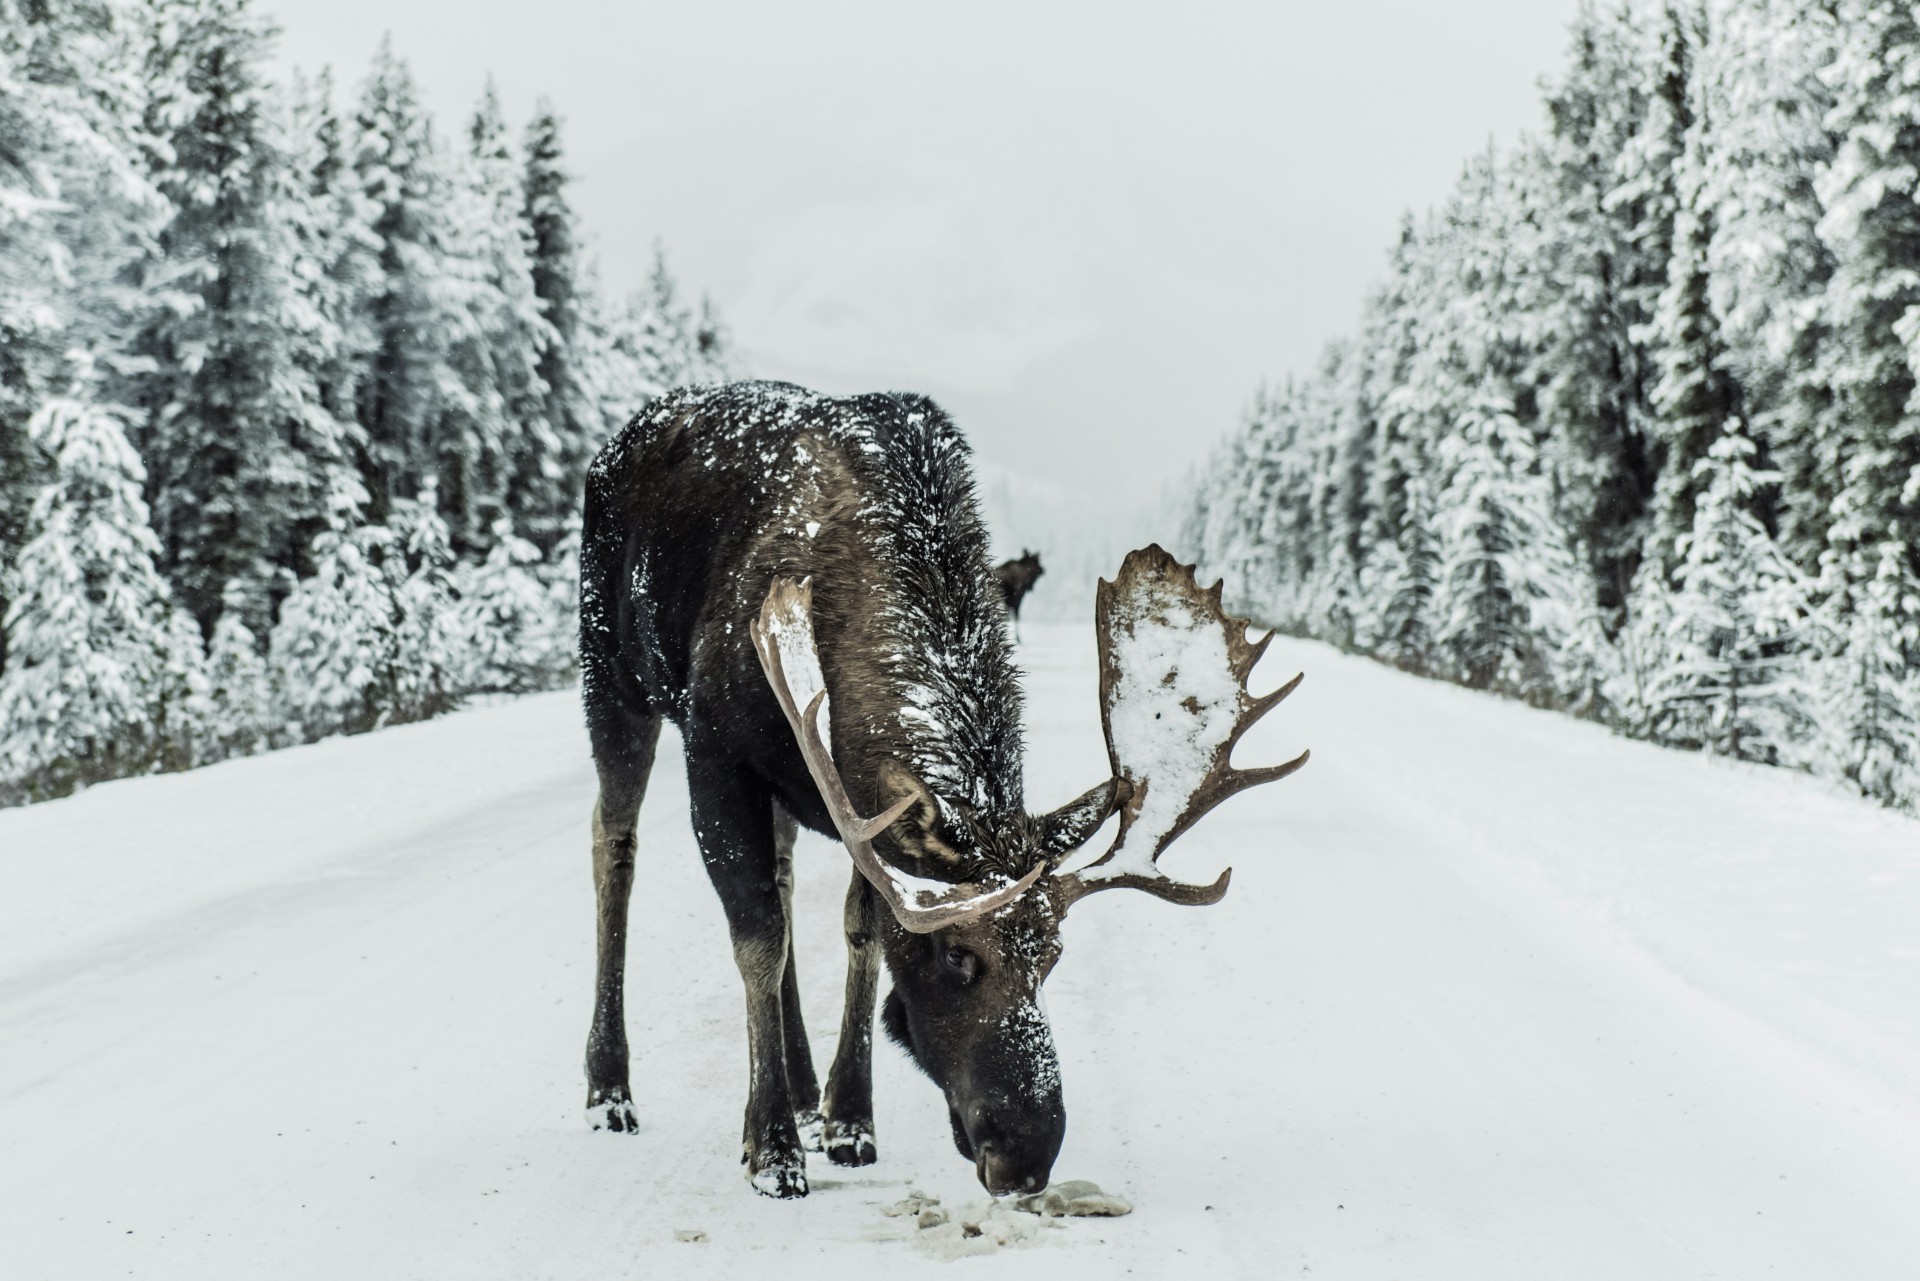 A moose on a snowy road